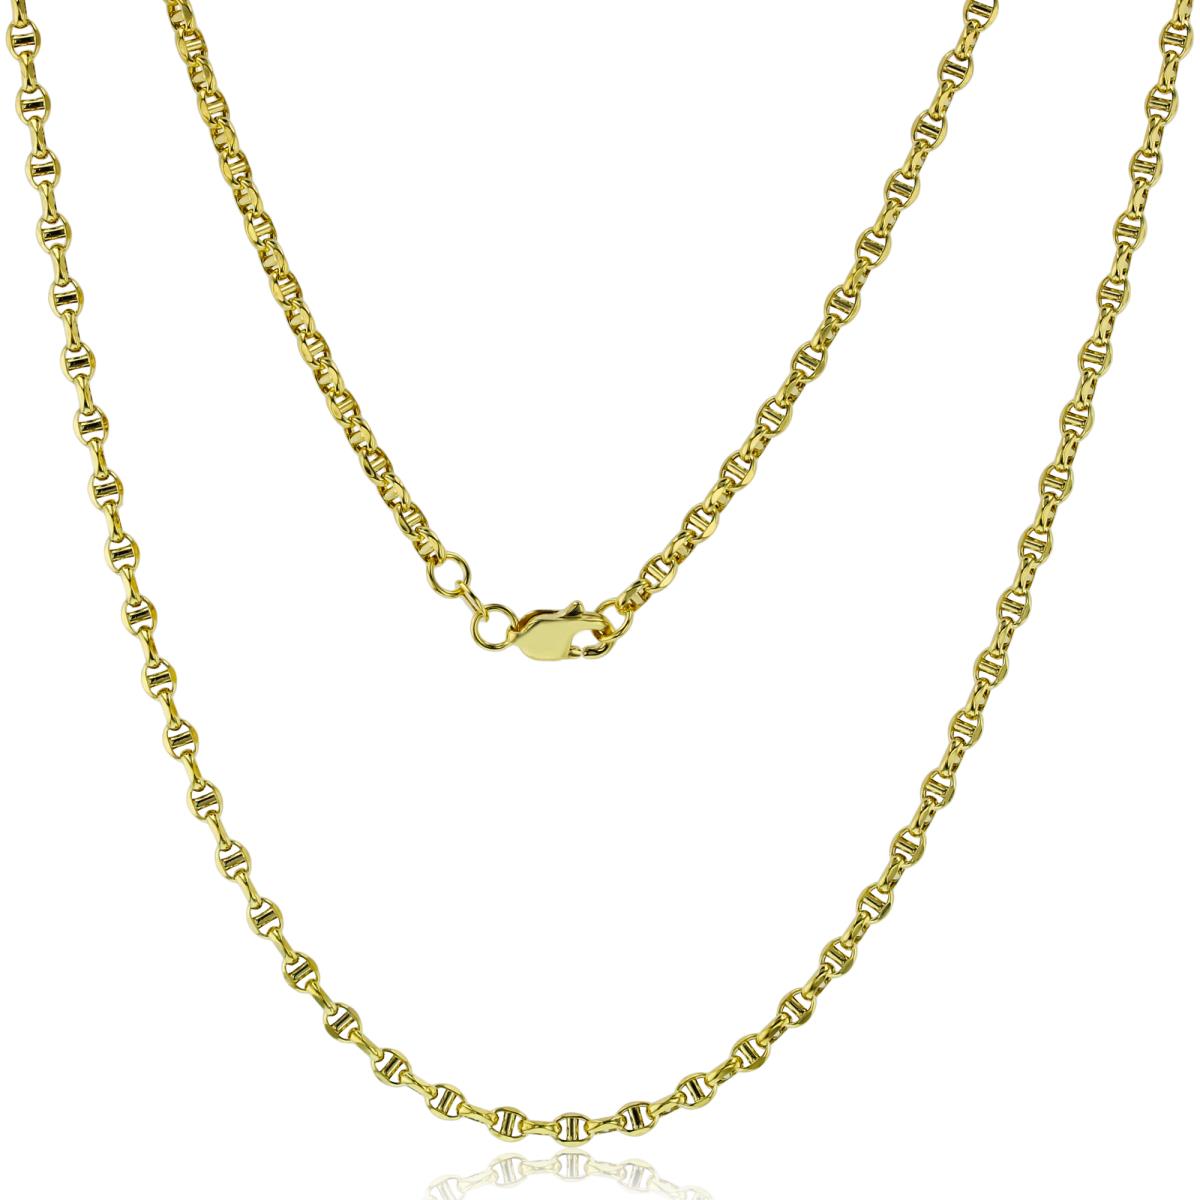 10K Yellow Gold Polished 3.00mm 18" Hollow Filk Chain